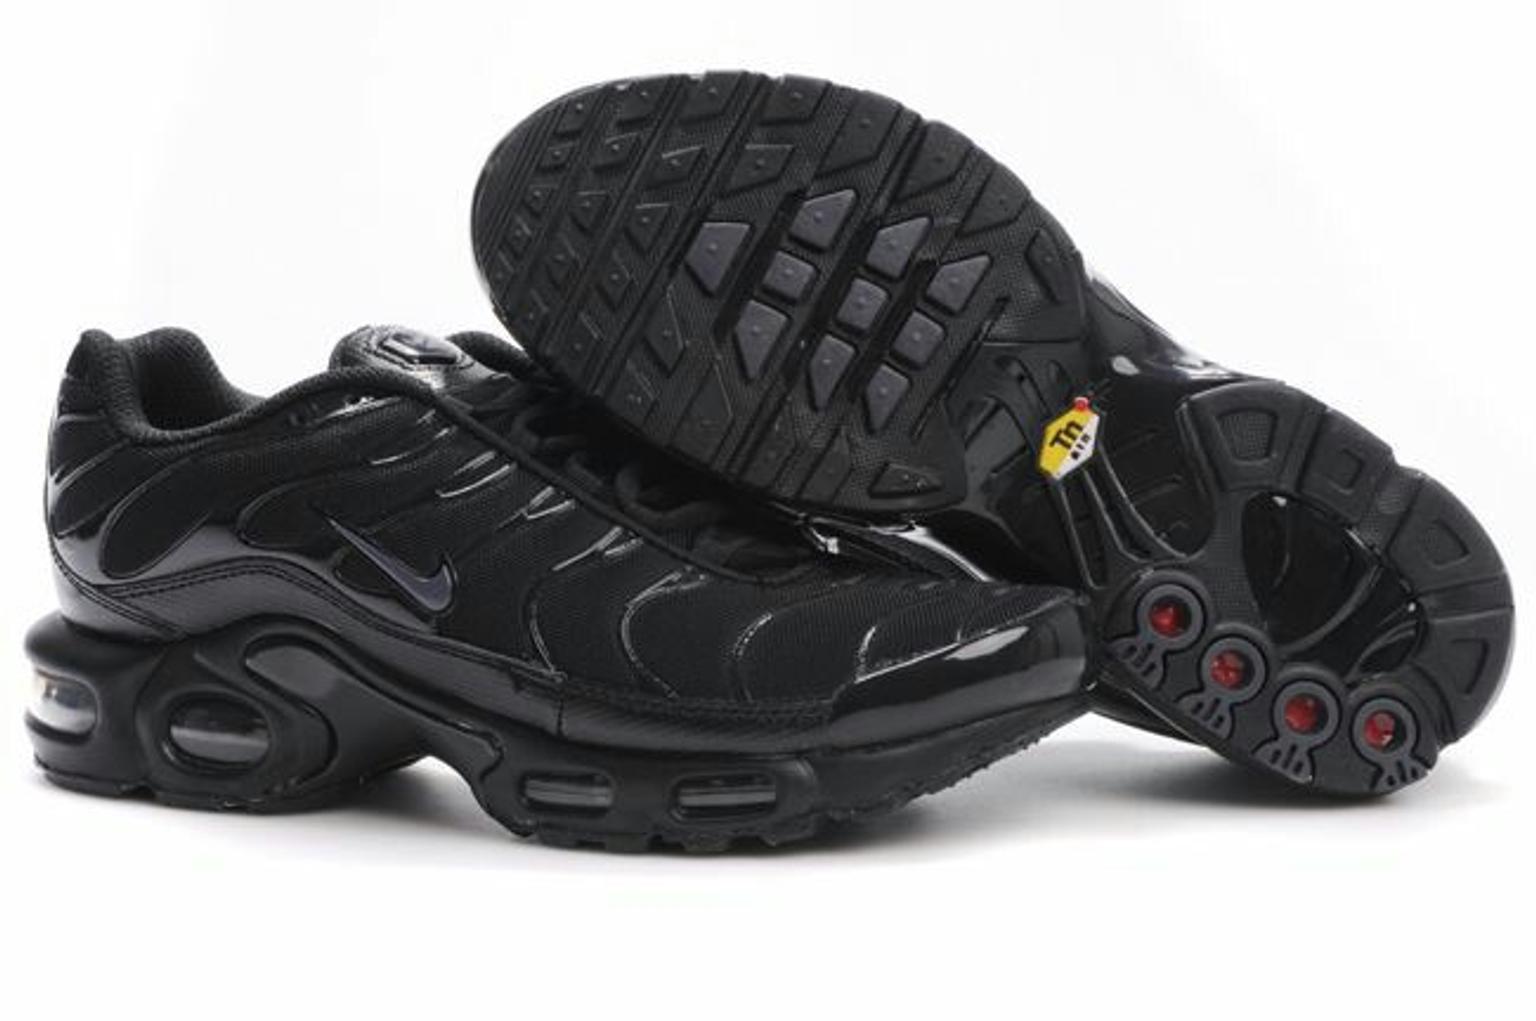 Nike tns all black size 8 in TS1 